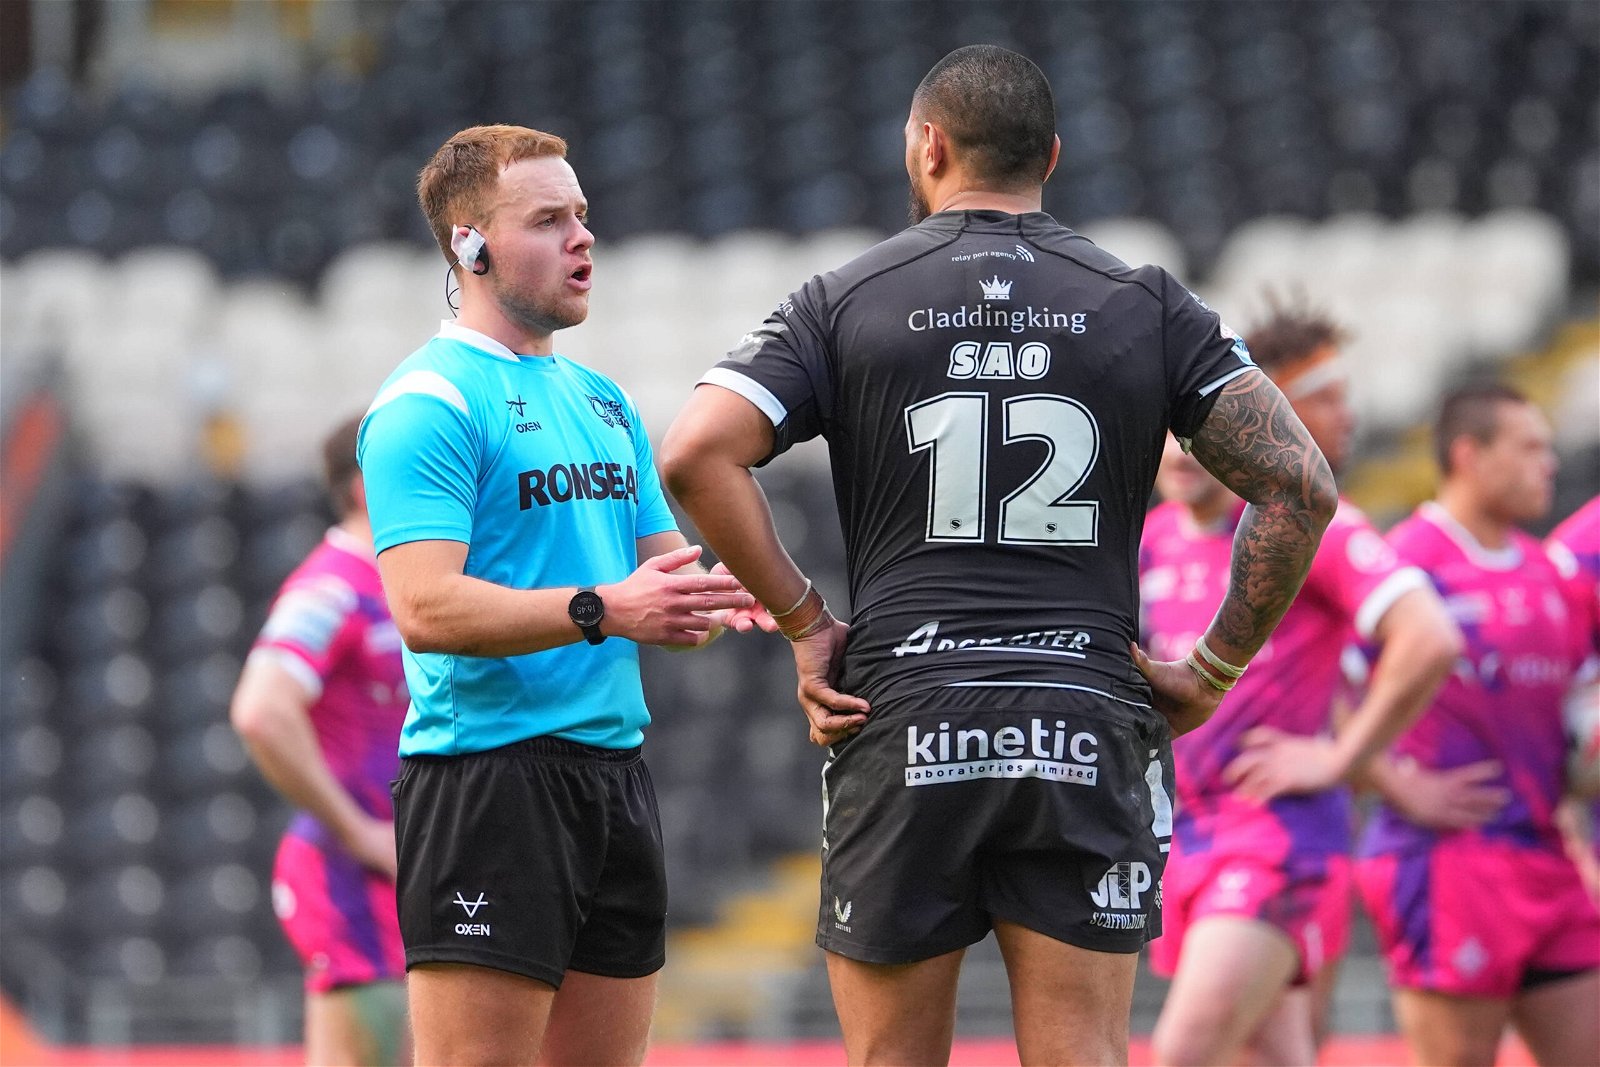 Ligi Sao of Hull FC being admonished by a referee in Super League disciplinary action